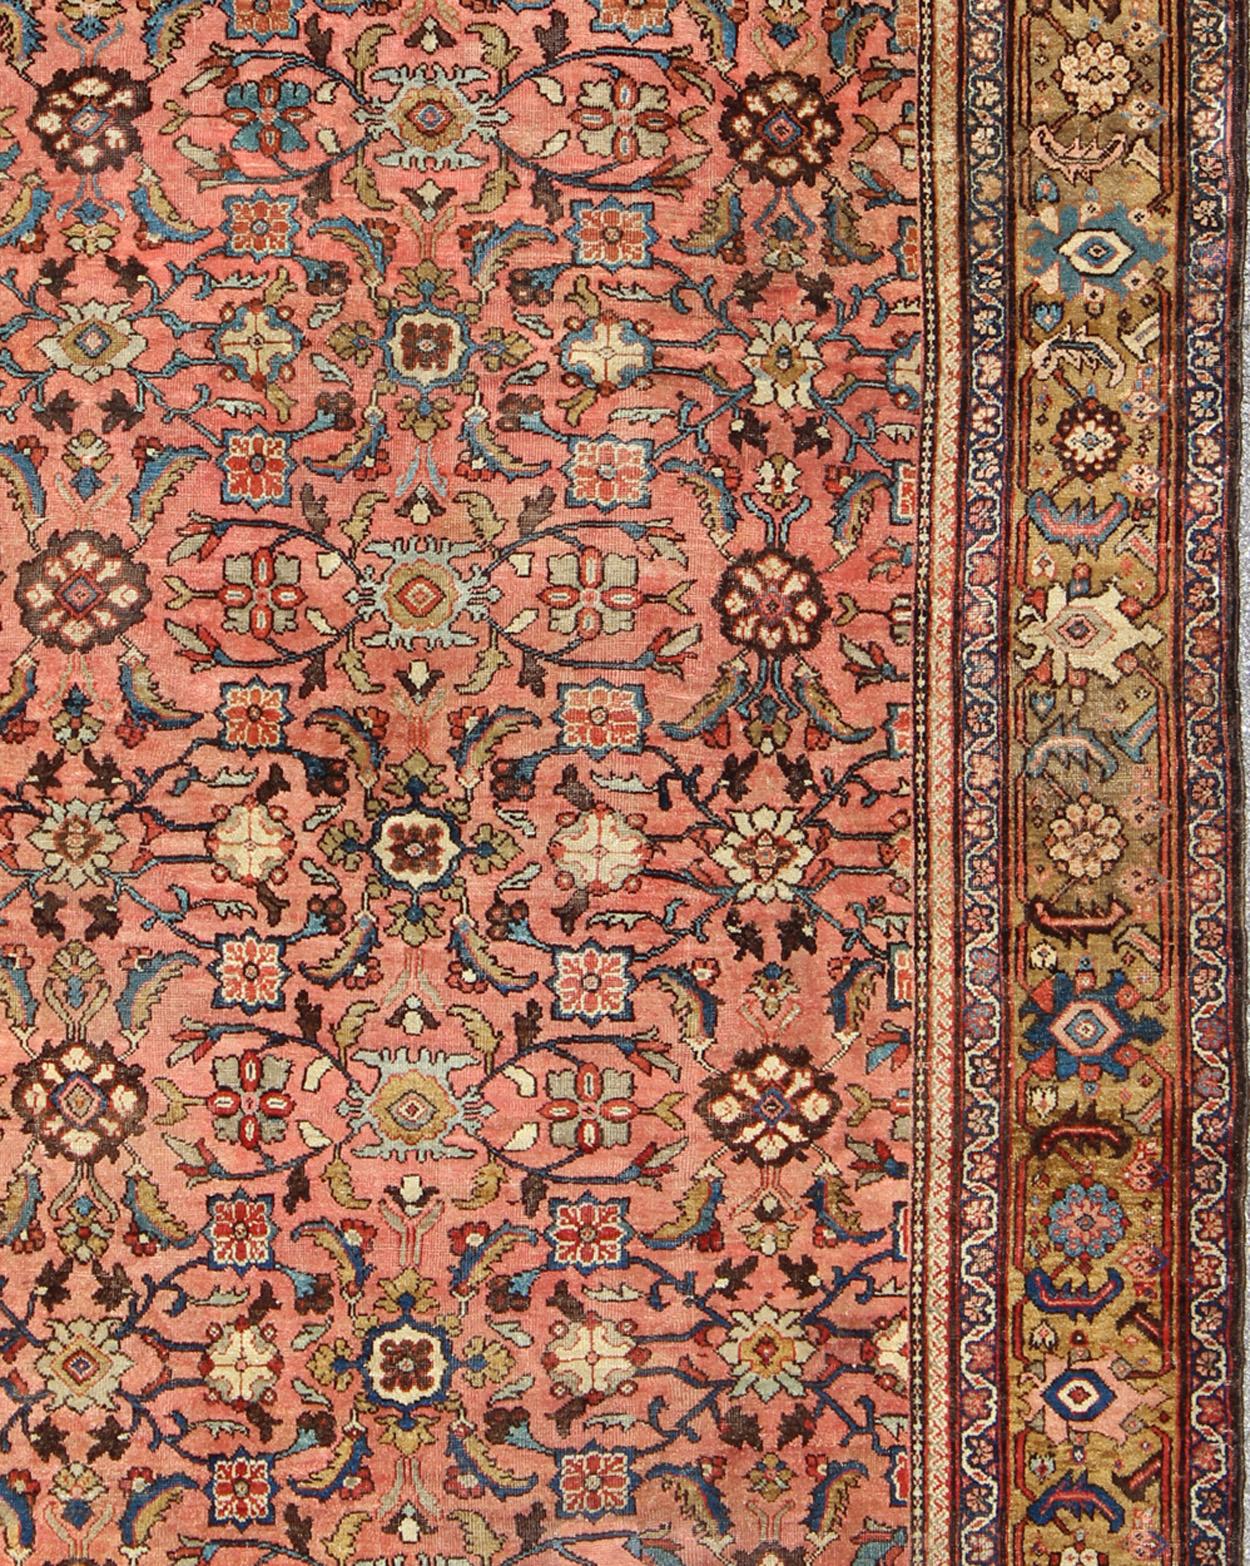 Antique 19th century Persian Sultanabad. Keivan Woven Arts / 1890, Keivan Woven Arts/rug/ C-0103, country of origin / type: Iran / Antique Sultanabad

Measures: 7'6 x 10'3.

This inspiring, late 19th century Sultanabad draws heavily from nature for